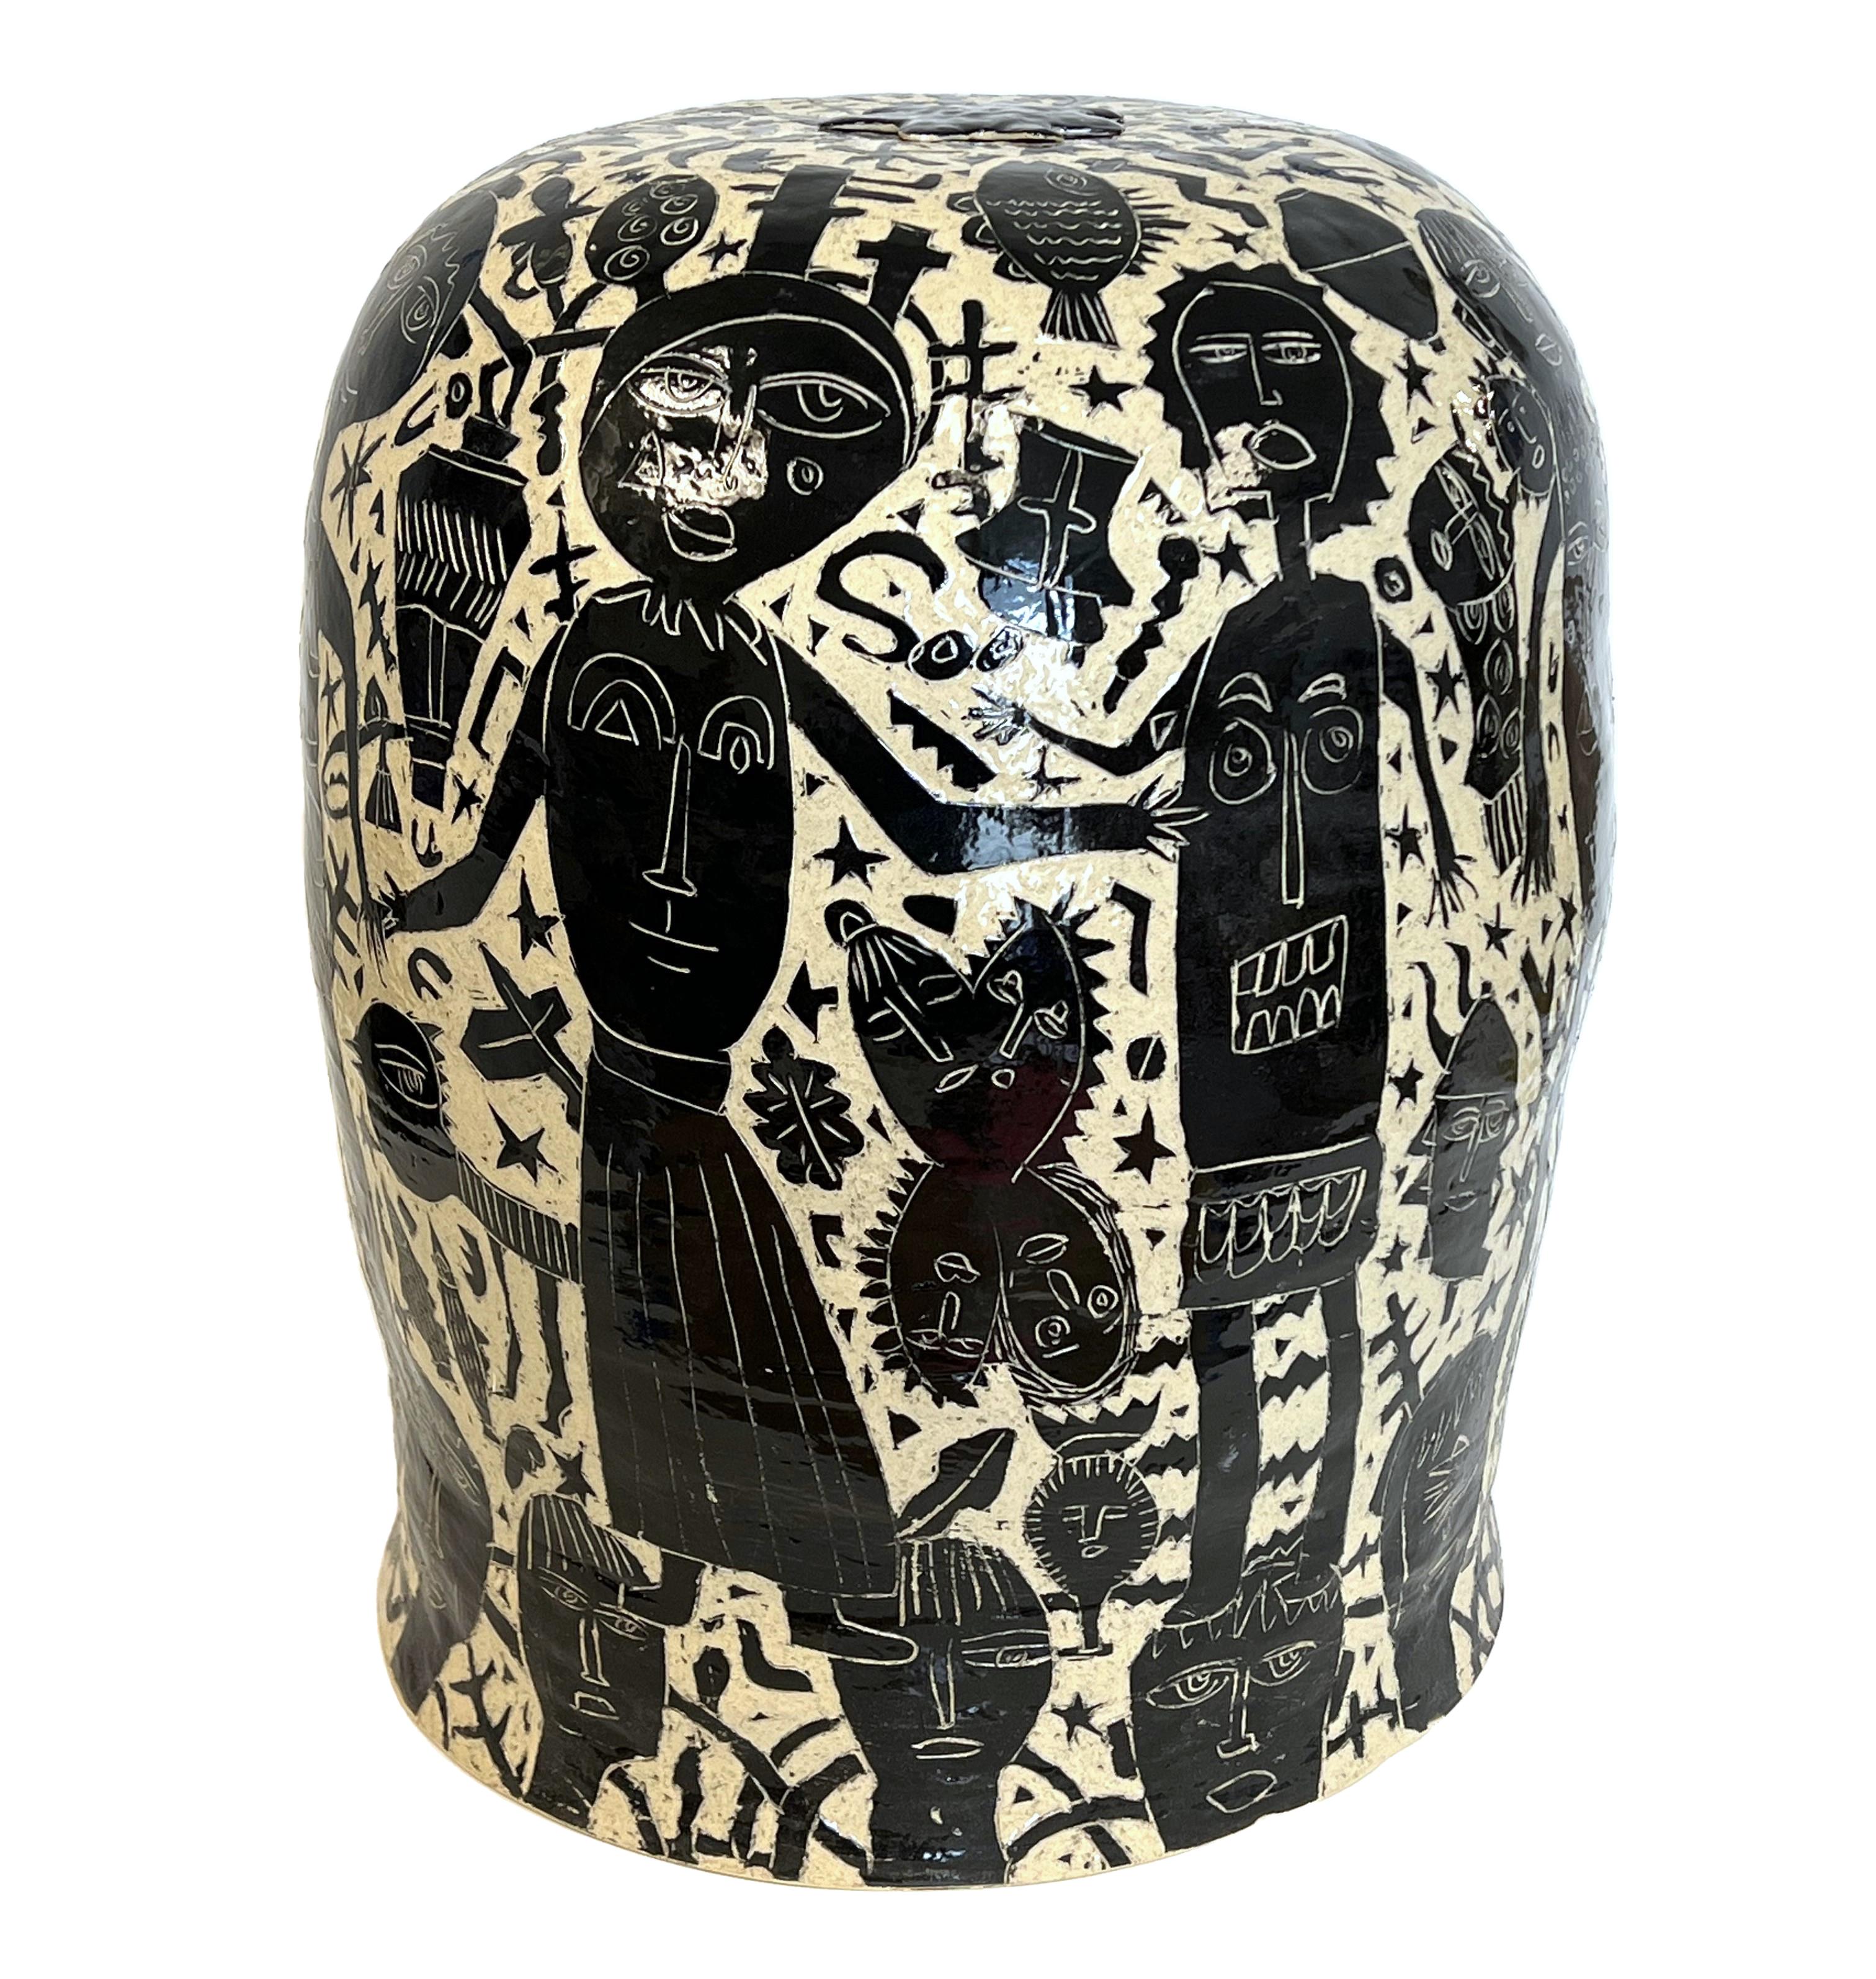 "Feel Your Blue Sky" Large Black & White Stoneware Jar with Figurative Elements